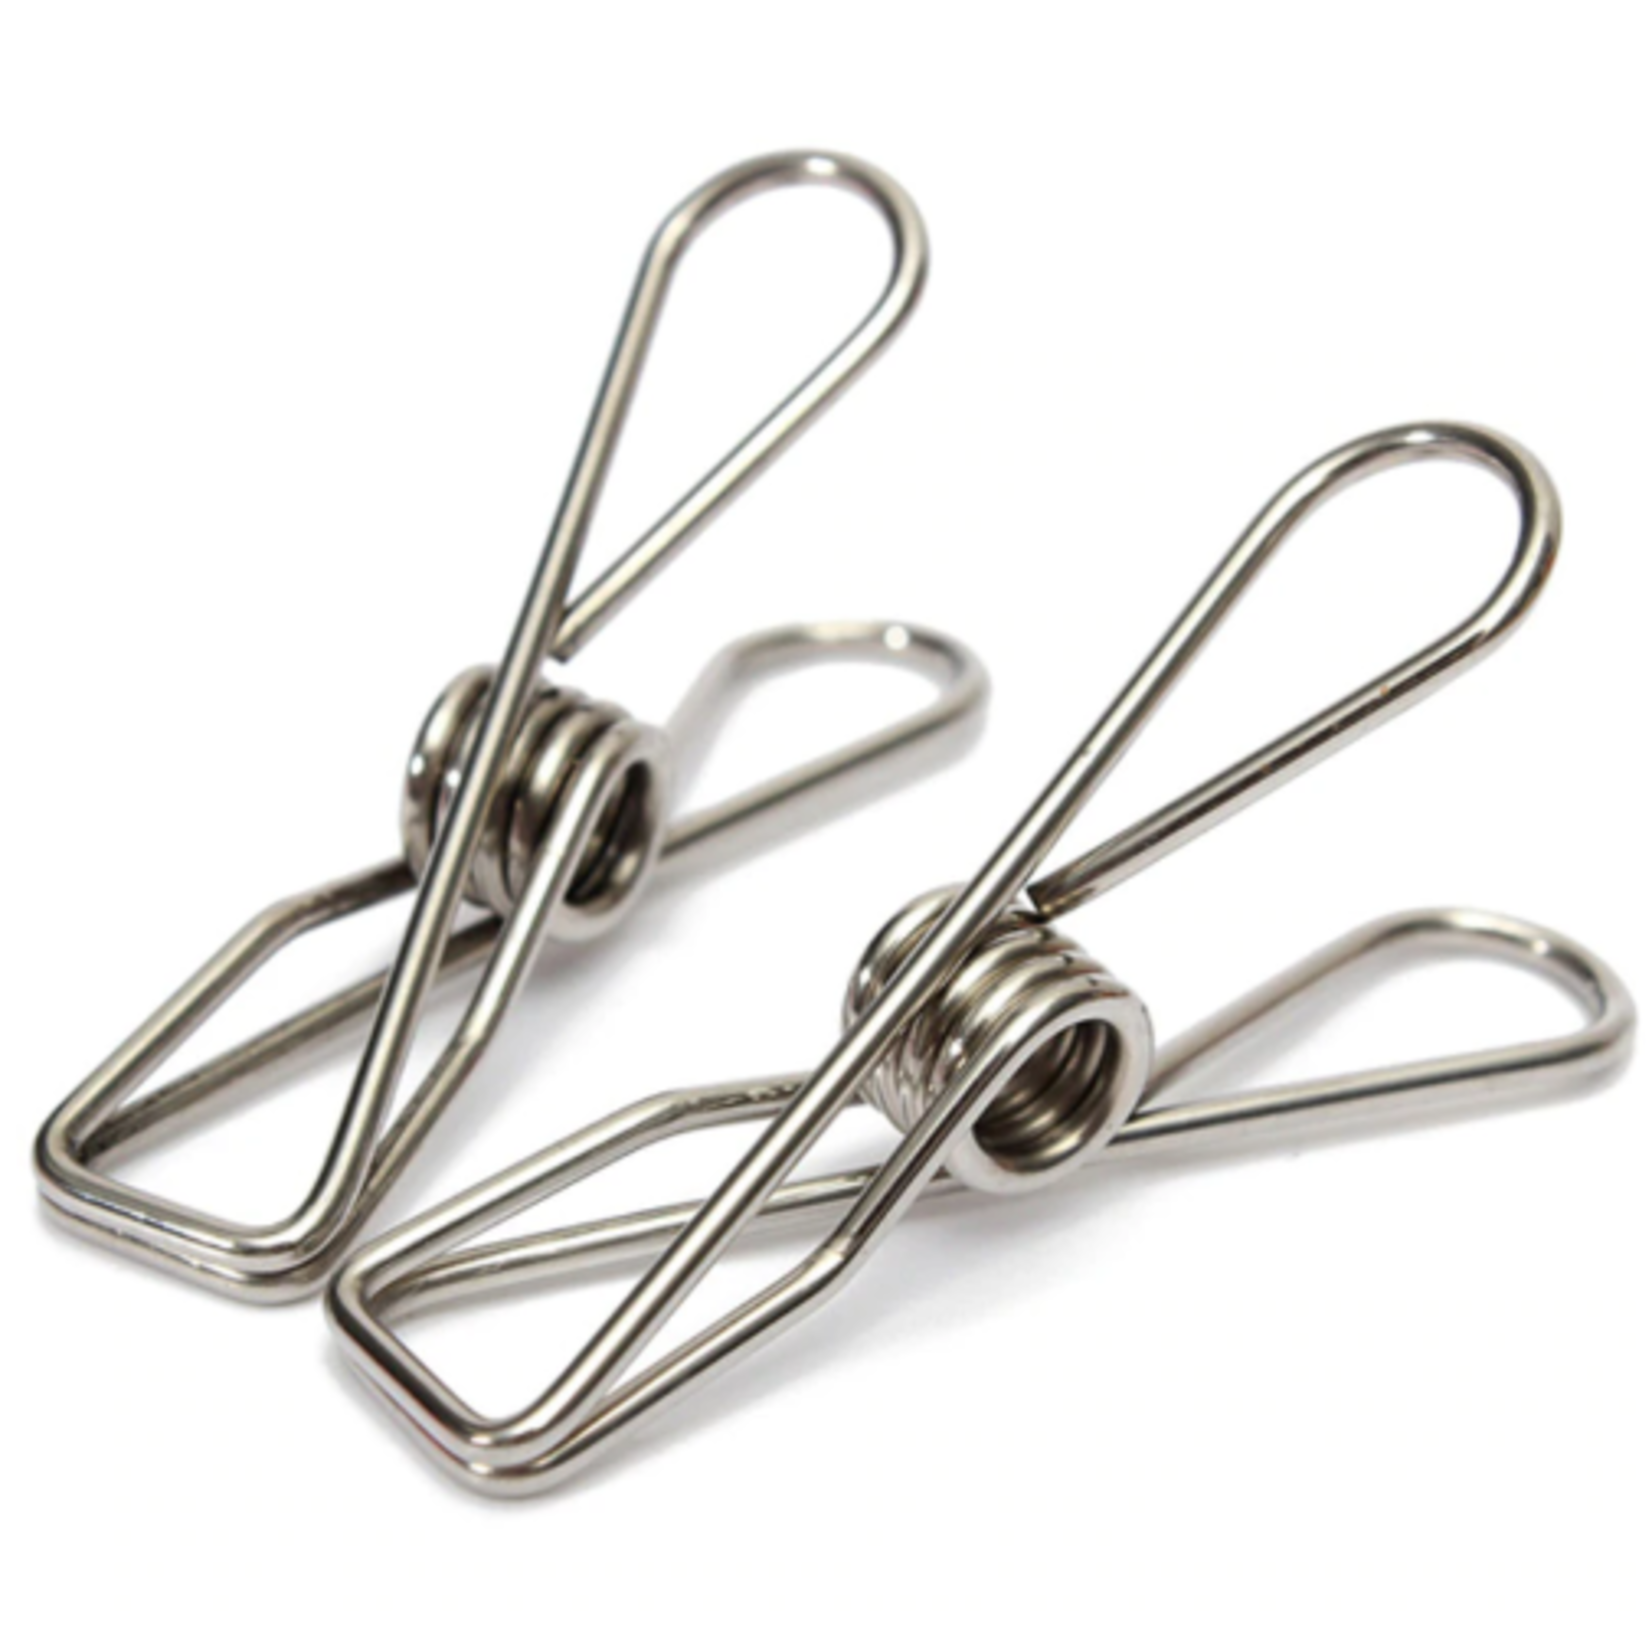 Activated Eco Pegs - Stainless Steel  (Activated Eco)